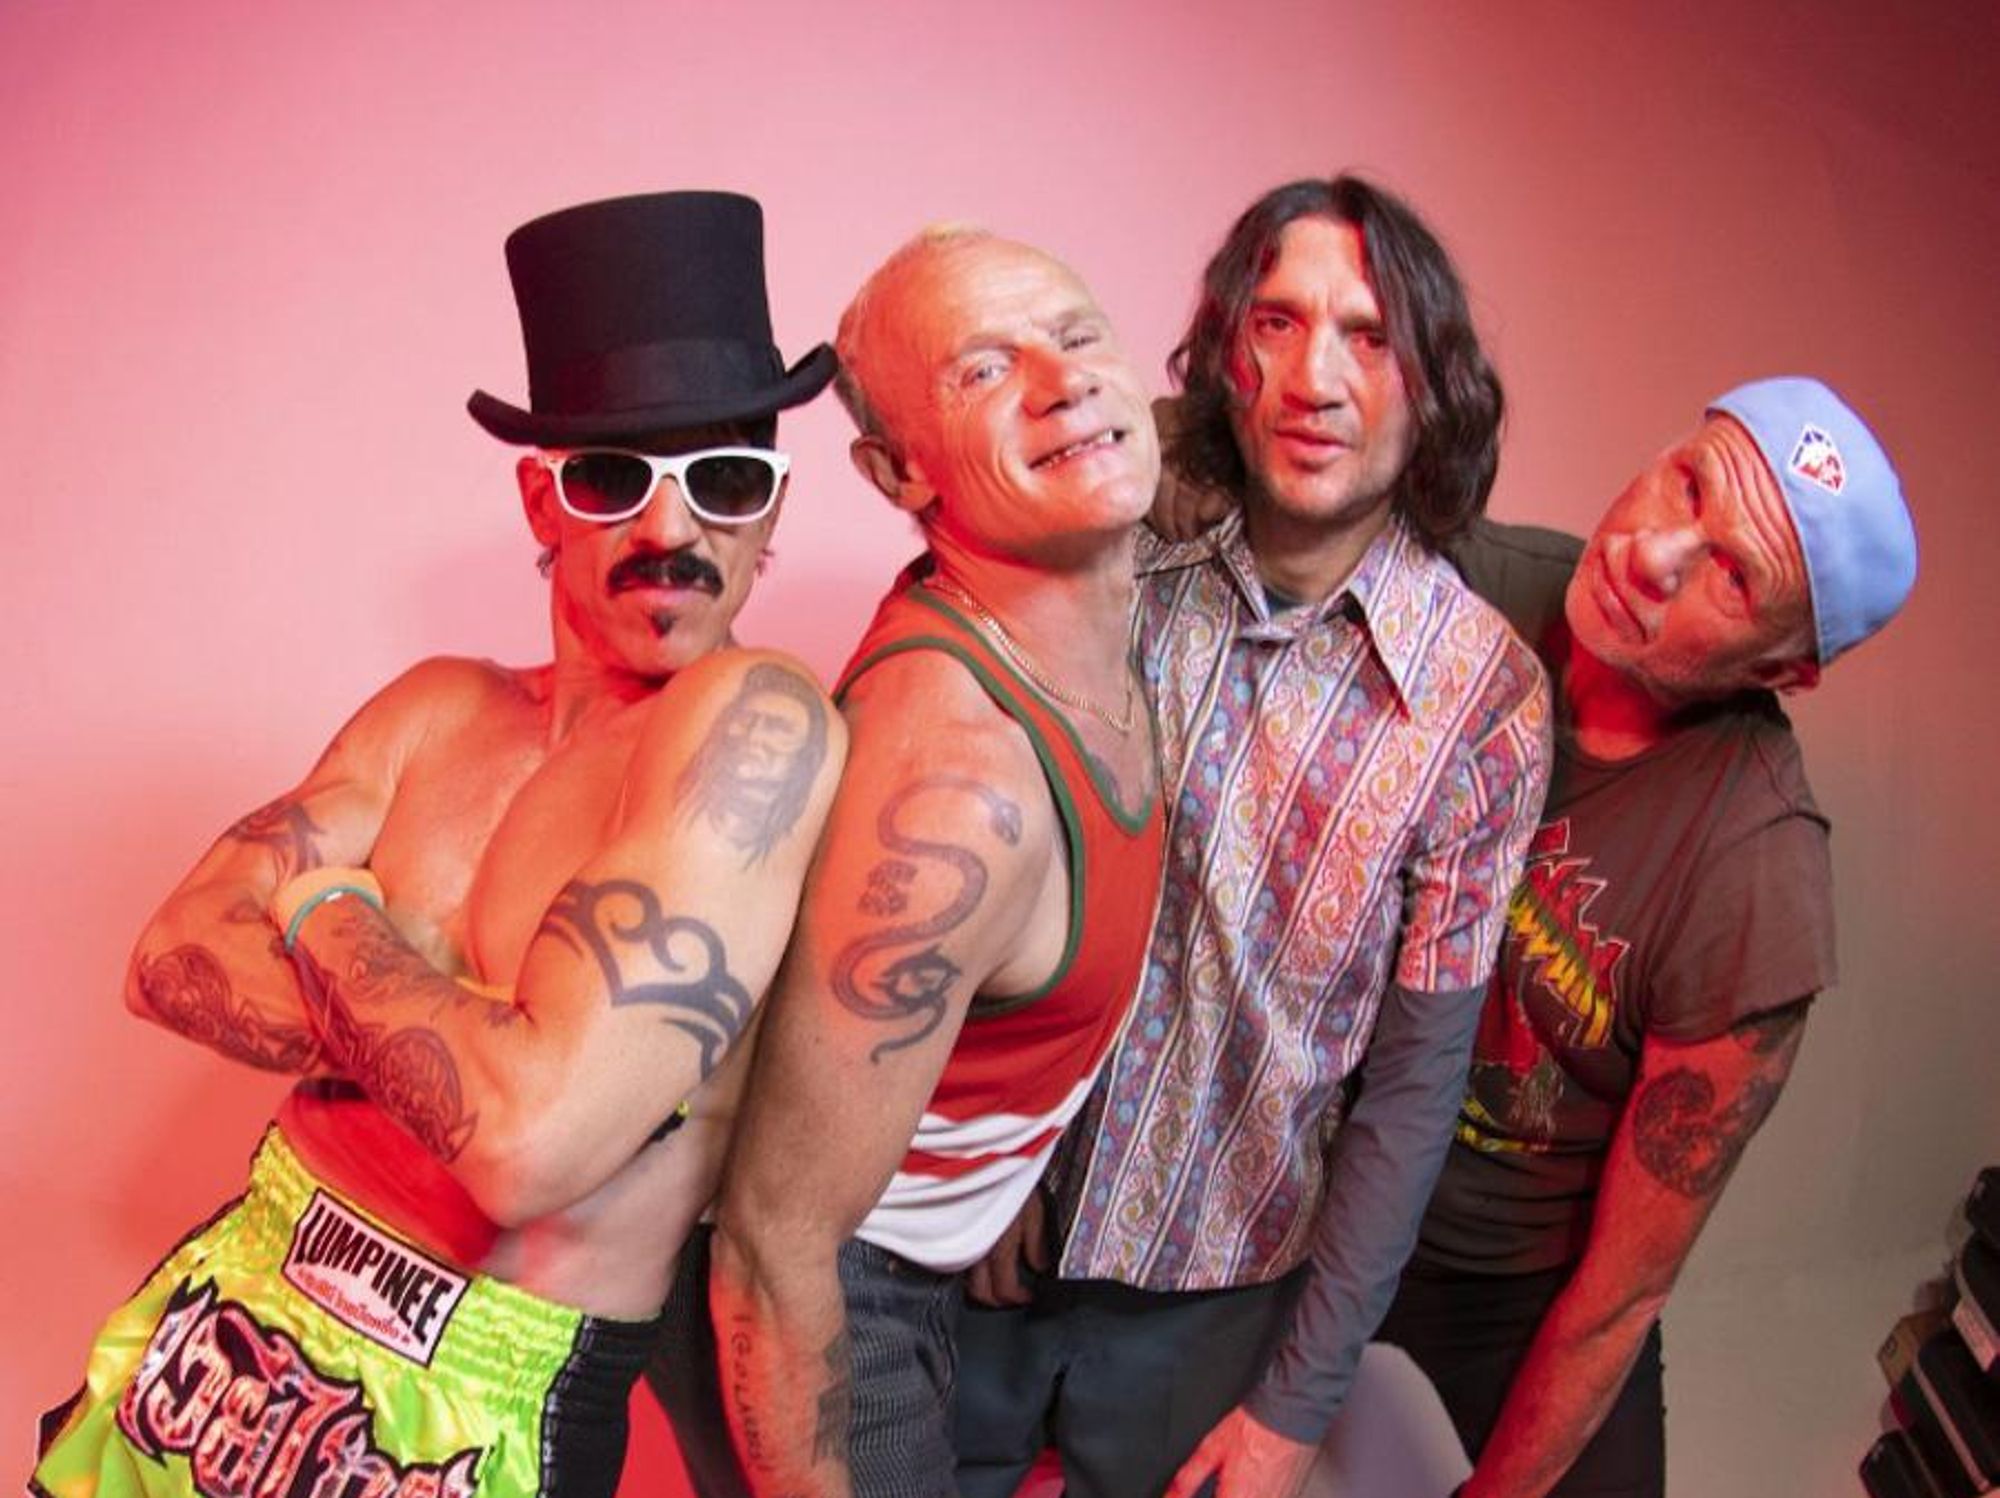 Red Hot Chili Peppers 2022